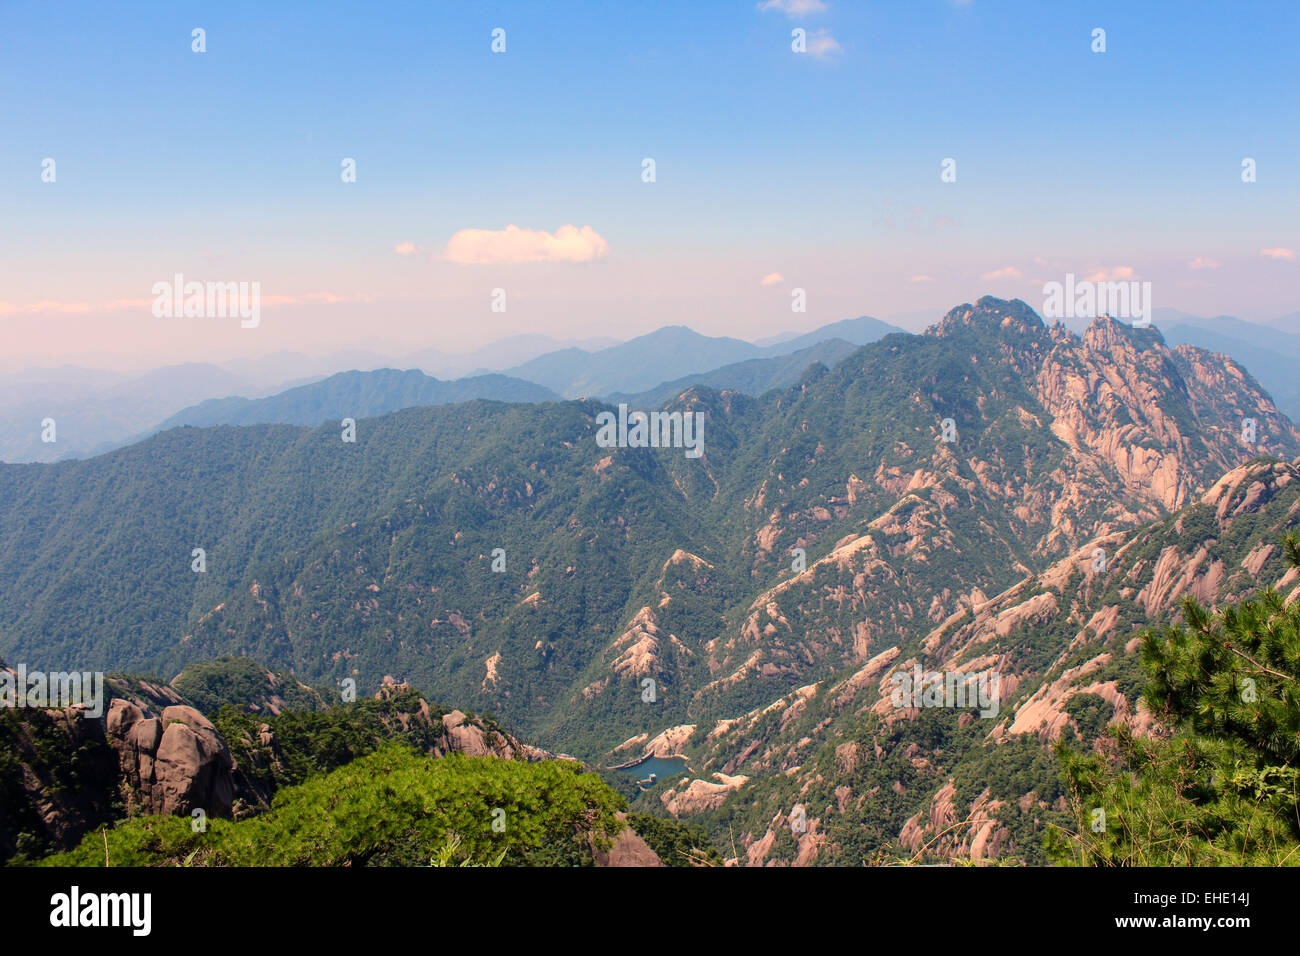 Photography of the Yellow Mountain, Huangshan, portraying one of China's most beautiful landscape fews. Stock Photo